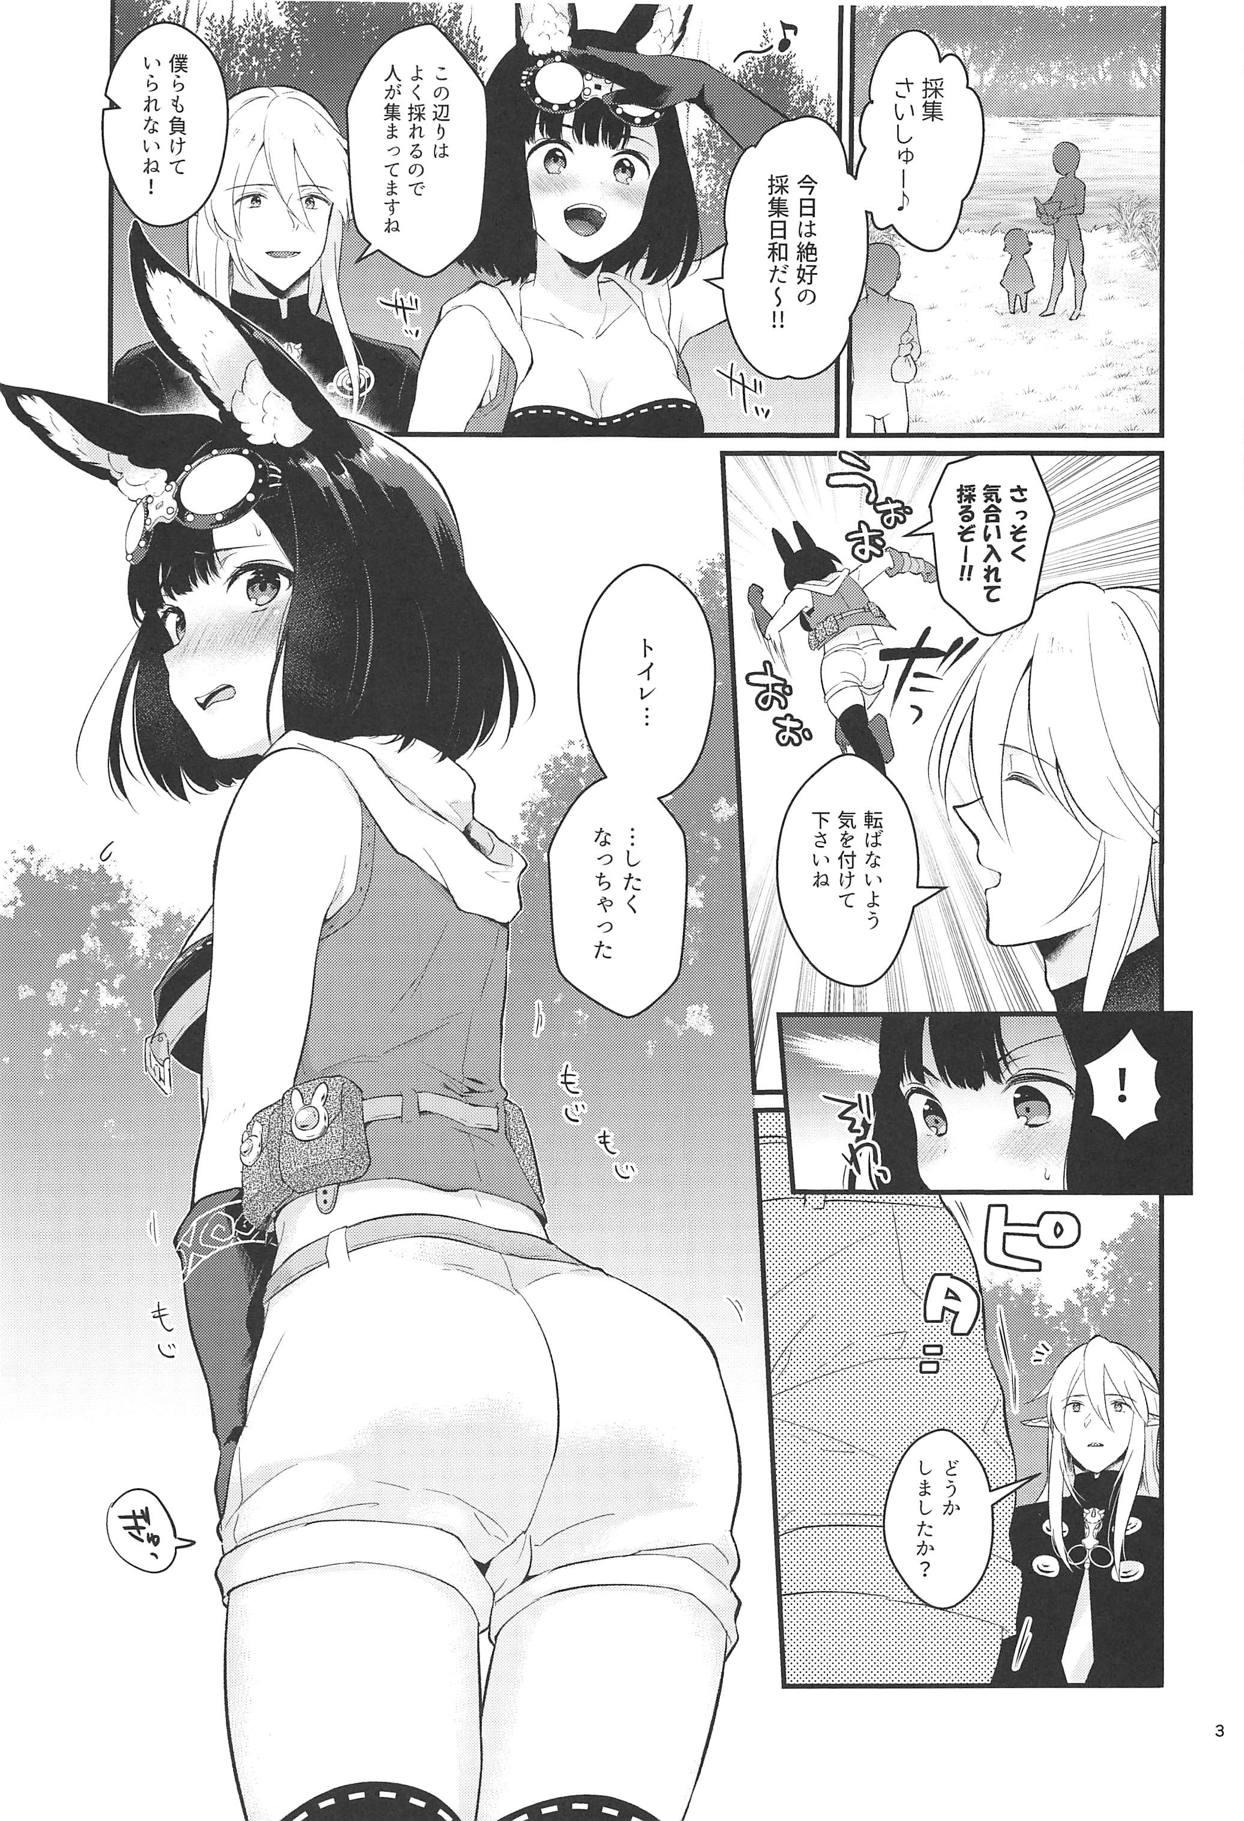 Massage Sex Outdoor Playing! - Etrian odyssey 4some - Page 4